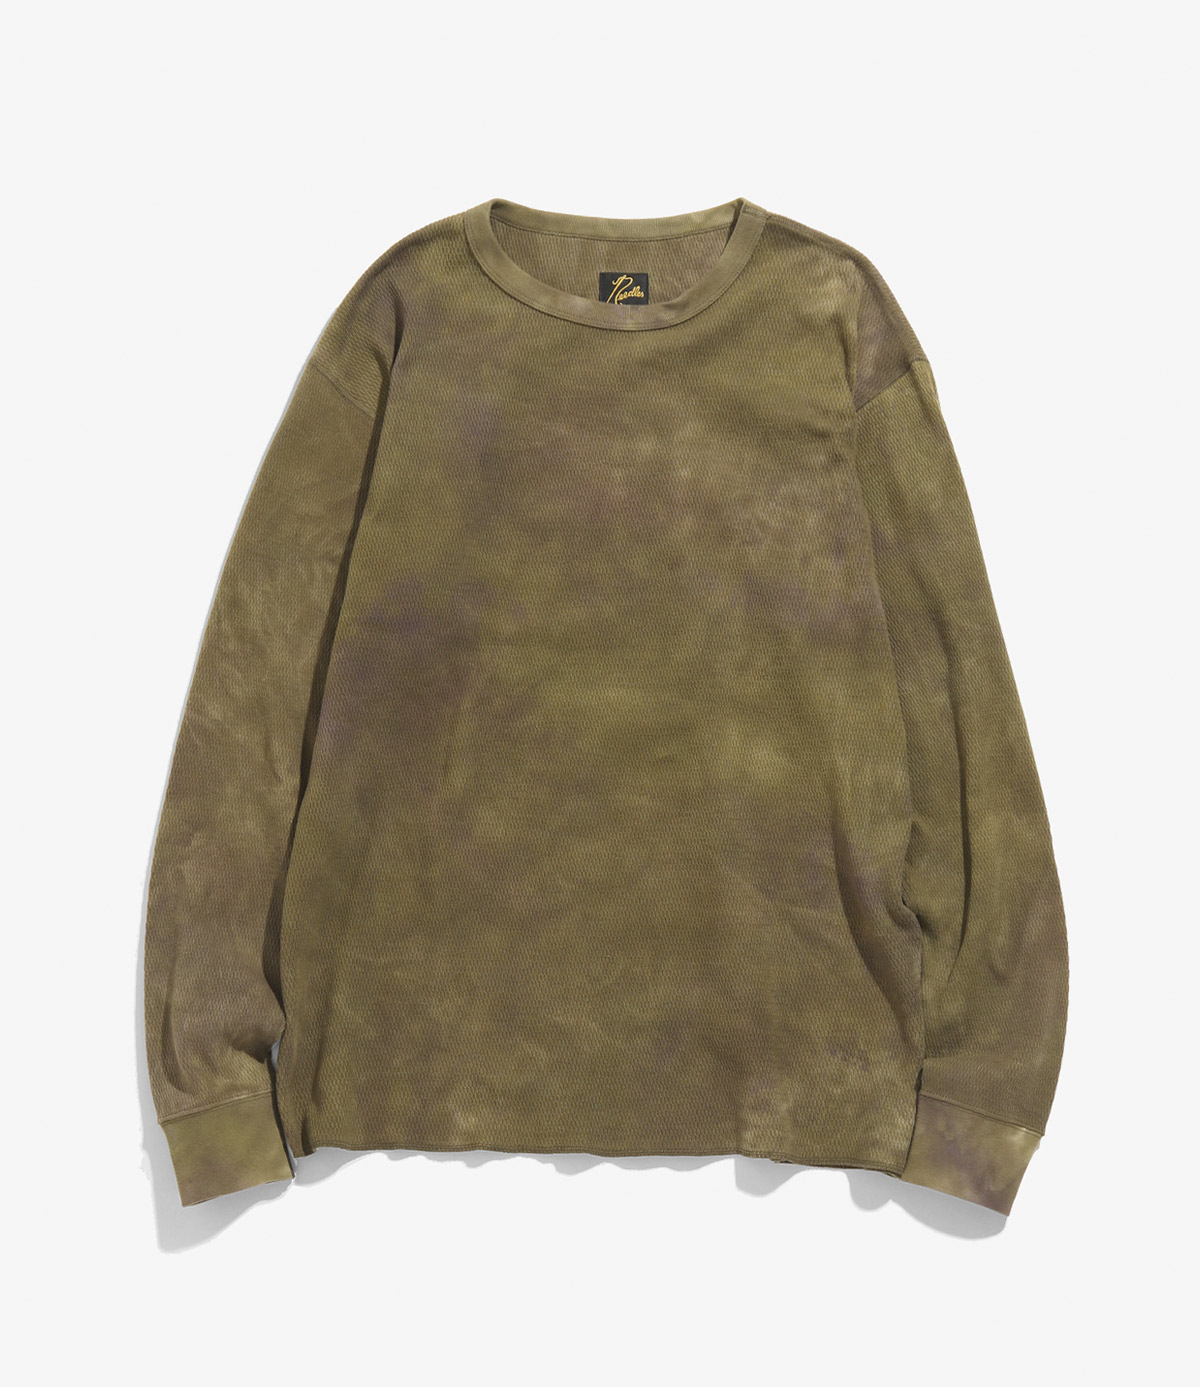 L/S CREW NECK TEE - COTTON THERMAL / UNEVEN DYE ¥16,500